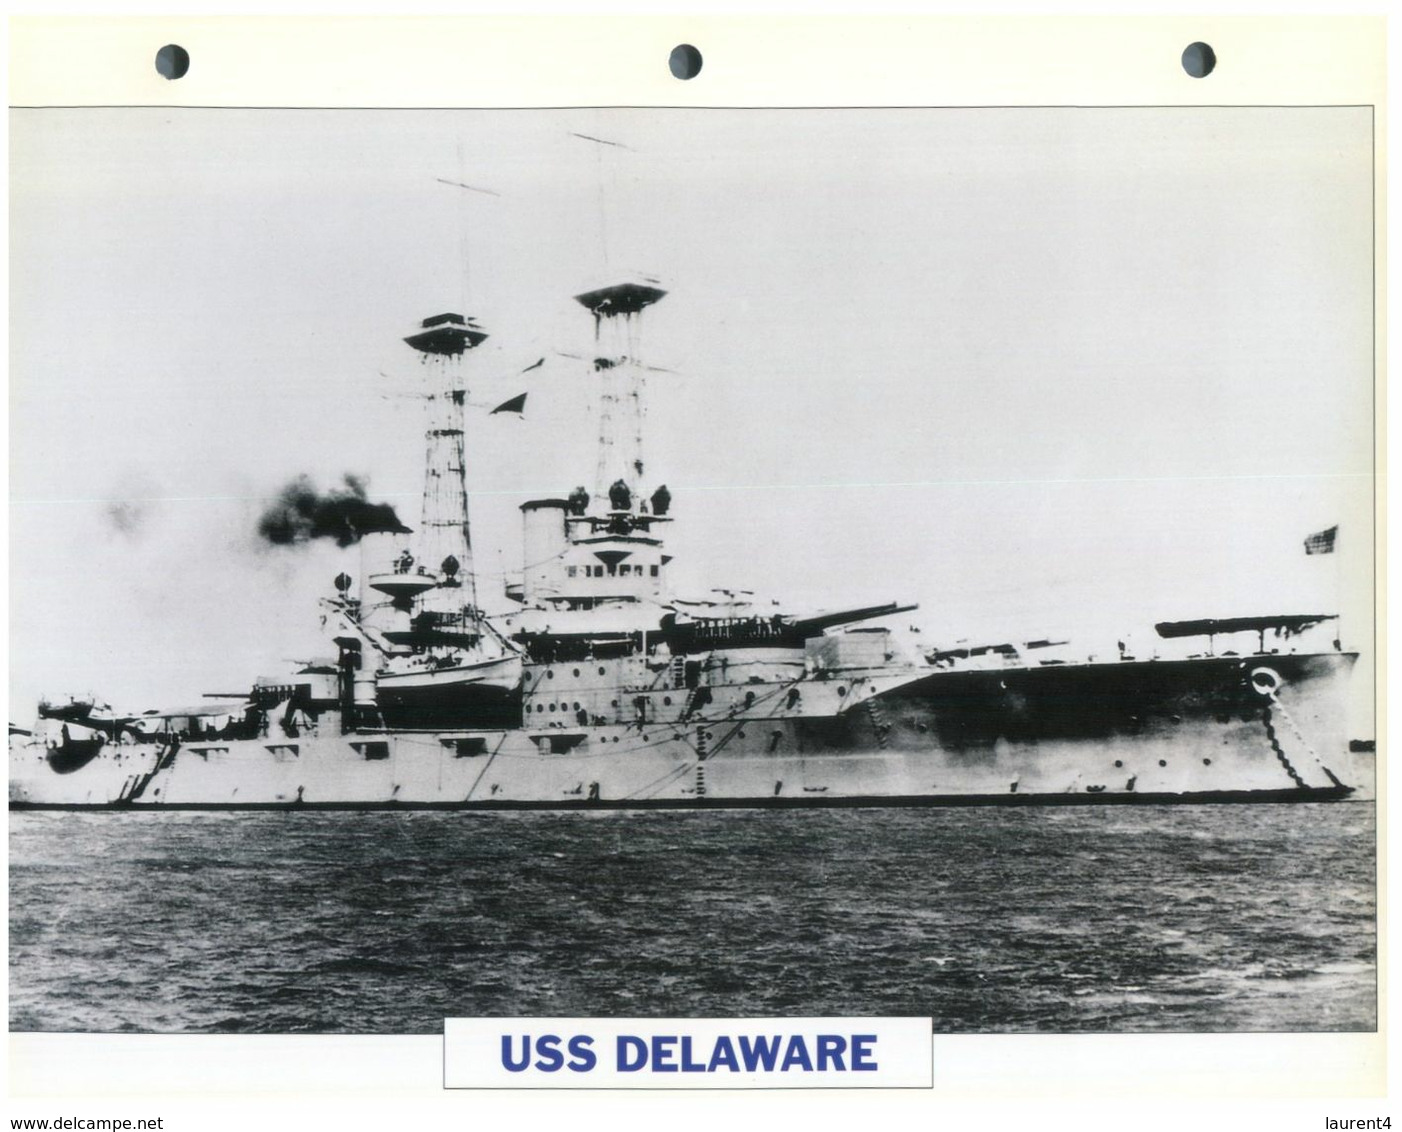 (25 X 19 Cm) (10-9-2020) - N - Photo And Info Sheet On Warship - US Navy - USS Delaware - Bateaux